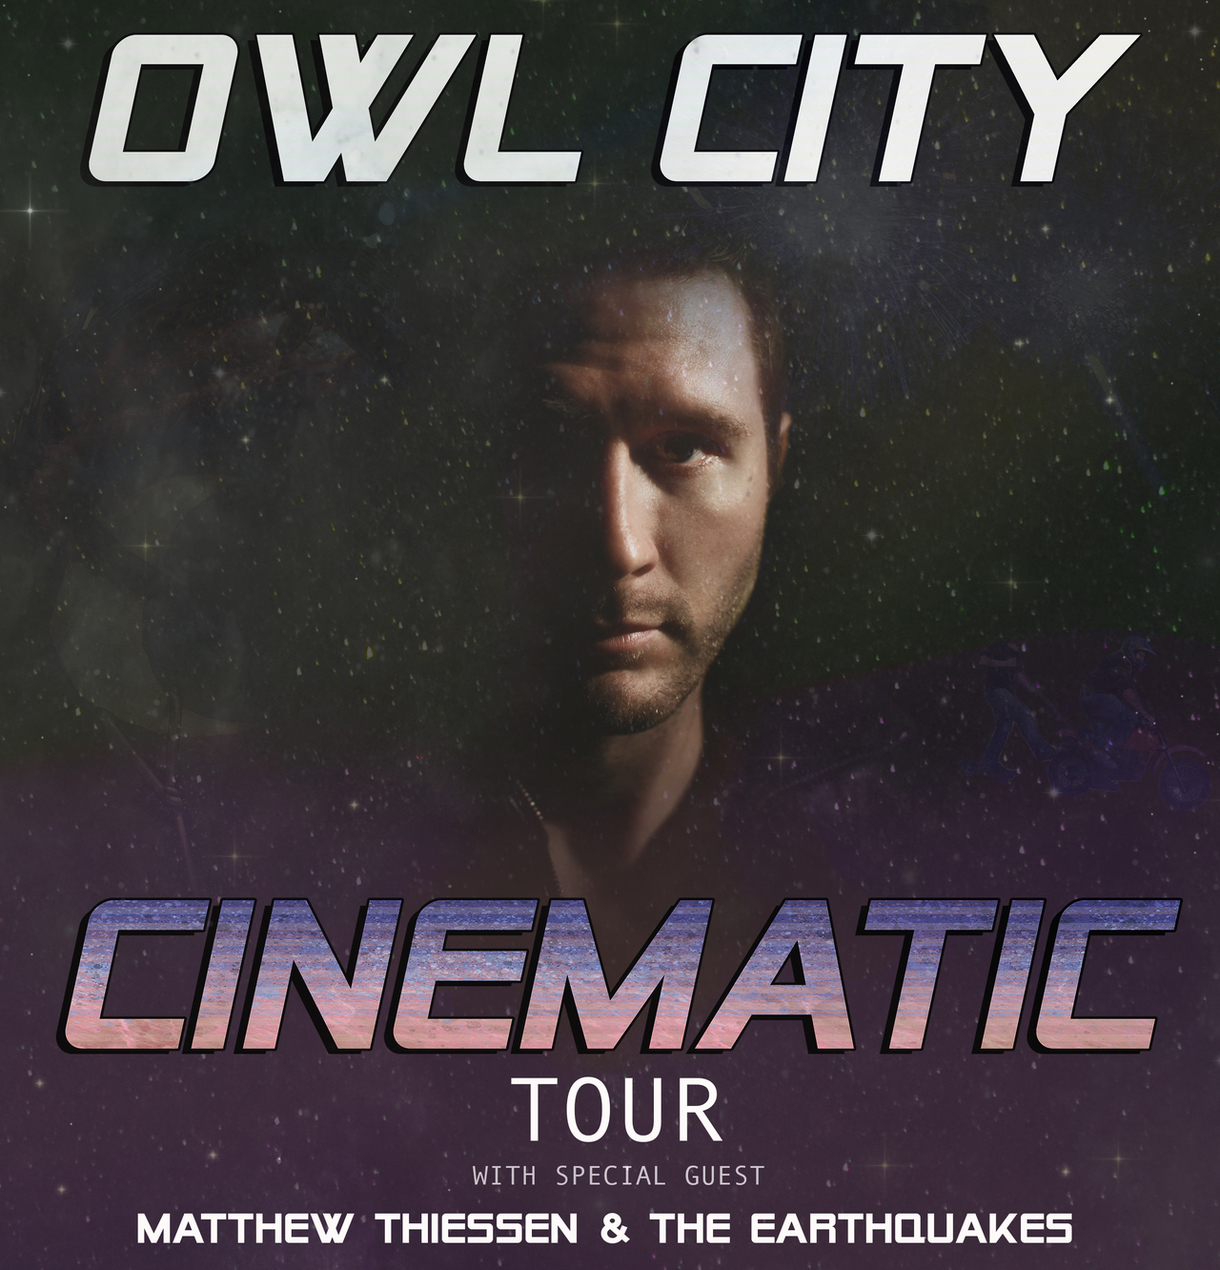 Artists News Owl City Announces The "Cinematic Tour" With Special